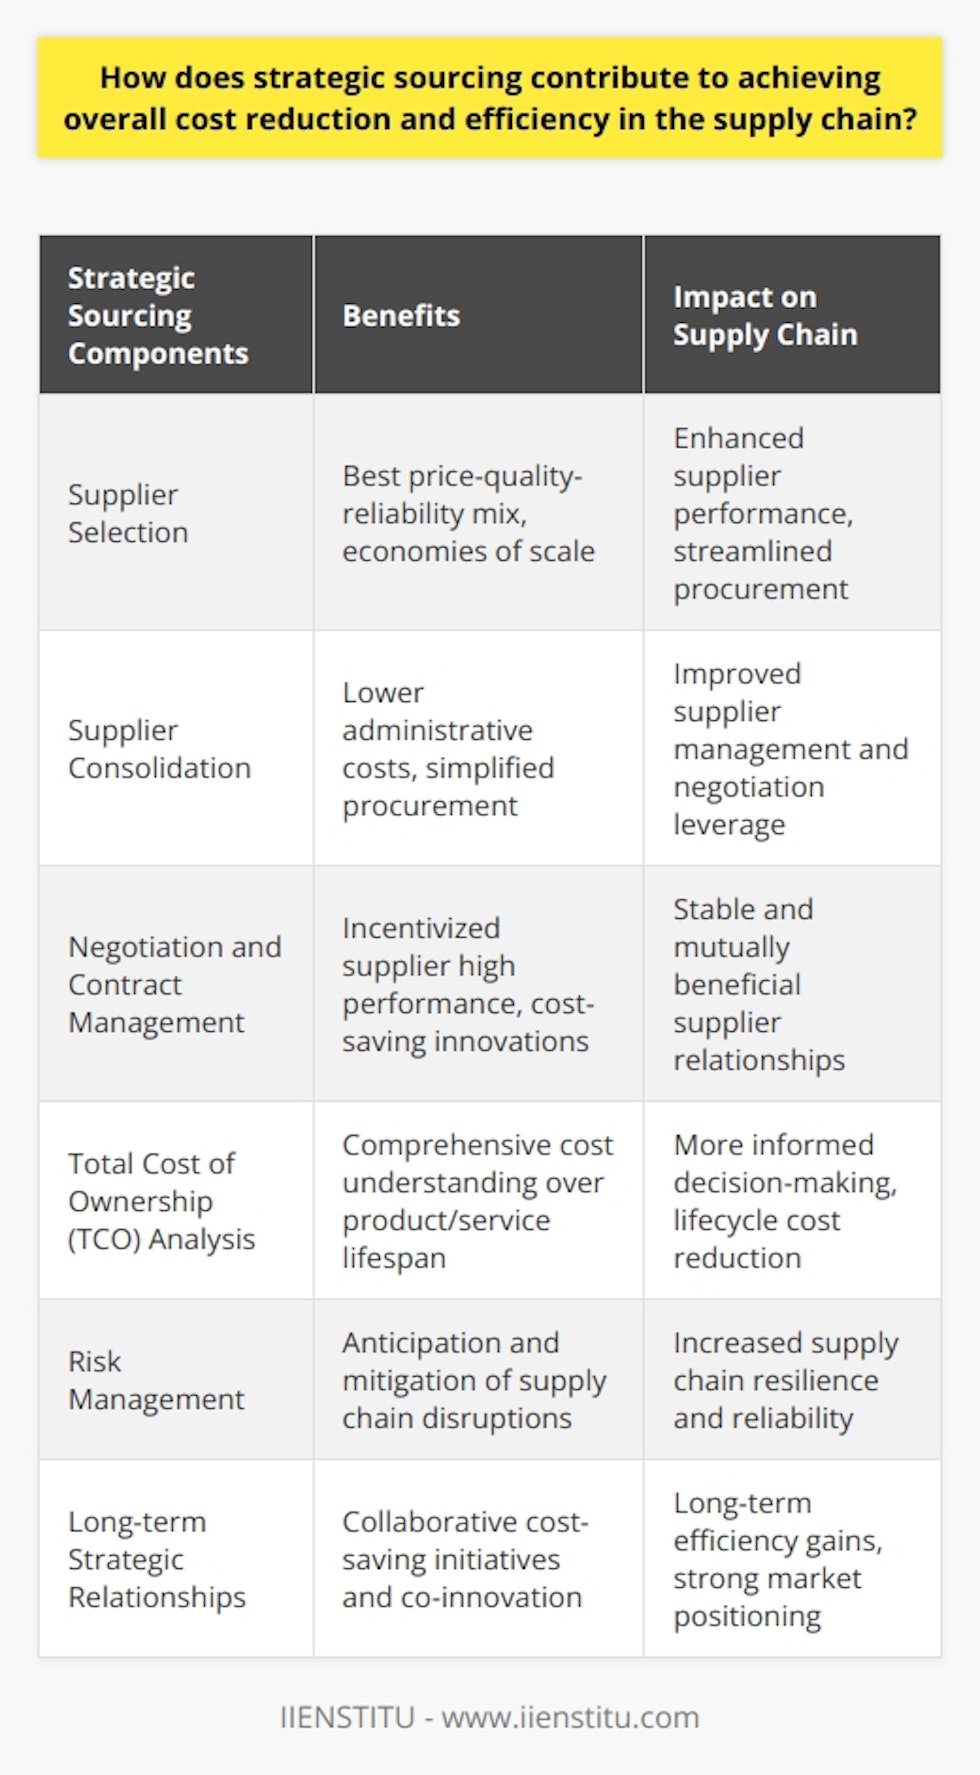 Strategic sourcing plays a pivotal role in refining supply chain management by delivering significant cost reductions and enhancing overall efficiency. This methodical approach to procurement encourages organizations to scrutinize their purchasing activities continually, focusing on not just the price but the total value proposition offered by suppliers.Strategic supplier selection is foundational to strategic sourcing. It operates on a principle of selecting vendors who offer the best combination of price, quality, and reliability. By establishing solid relationships with a few chosen suppliers, companies can benefit from economies of scale, lower transaction costs, and foster collaborative relationships aimed at continuous improvement and innovation.Consolidation of suppliers is another benefit of strategic sourcing. By reducing the number of suppliers, an organization can streamline its procurement process, thus lowering administrative costs and reducing complexity. This consolidation leads to better-managed relationships, as the company can focus more on fewer suppliers, which often results in better terms due to the increased volume of business.When engaging with suppliers, strategic sourcing emphasizes the importance of robust negotiation and skilled contract management. It's not just about securing a lower immediate price but also about drafting contracts that incentivize suppliers to maintain high performance and share the benefits of any cost-saving innovations. Long-term contracts provide stability and allow for the development of mutually beneficial relationships that can contribute to continual cost optimization.A critical component of strategic sourcing is conducting a Total Cost of Ownership (TCO) analysis, which goes beyond the purchase price to encompass all costs associated with the product or service over its lifespan. These include costs like maintenance, repair, operations, and even disposal. By understanding TCO, organizations can make more informed decisions that reduce spending across the lifecycle of the product or service.Risk management is inherent in strategic sourcing as it focuses on creating a resilient supply chain capable of withstanding various disruptions. By conducting thorough risk assessments, businesses can anticipate and mitigate potential issues that could lead to increased costs or supply chain inefficiencies. This proactive stance fortifies the supply chain against unexpected market volatilities and supplier issues.Finally, strategic sourcing emphasizes the cultivation of long-term strategic relationships with suppliers. By working closely with suppliers, companies can coax out collaborative cost-saving initiatives and co-develop innovative solutions that lead to efficiency gains. These partnerships prioritize consistent communication, joint problem-solving, and shared goals that benefit all parties involved.In practical terms, strategic sourcing is not an isolated procurement tactic but an integrated approach that considers the interdependencies within the supply chain. By recognizing these connections and managing them intelligently, organizations can drive down costs, boost operational efficiency, and therefore, secure a more formidable position in the market.